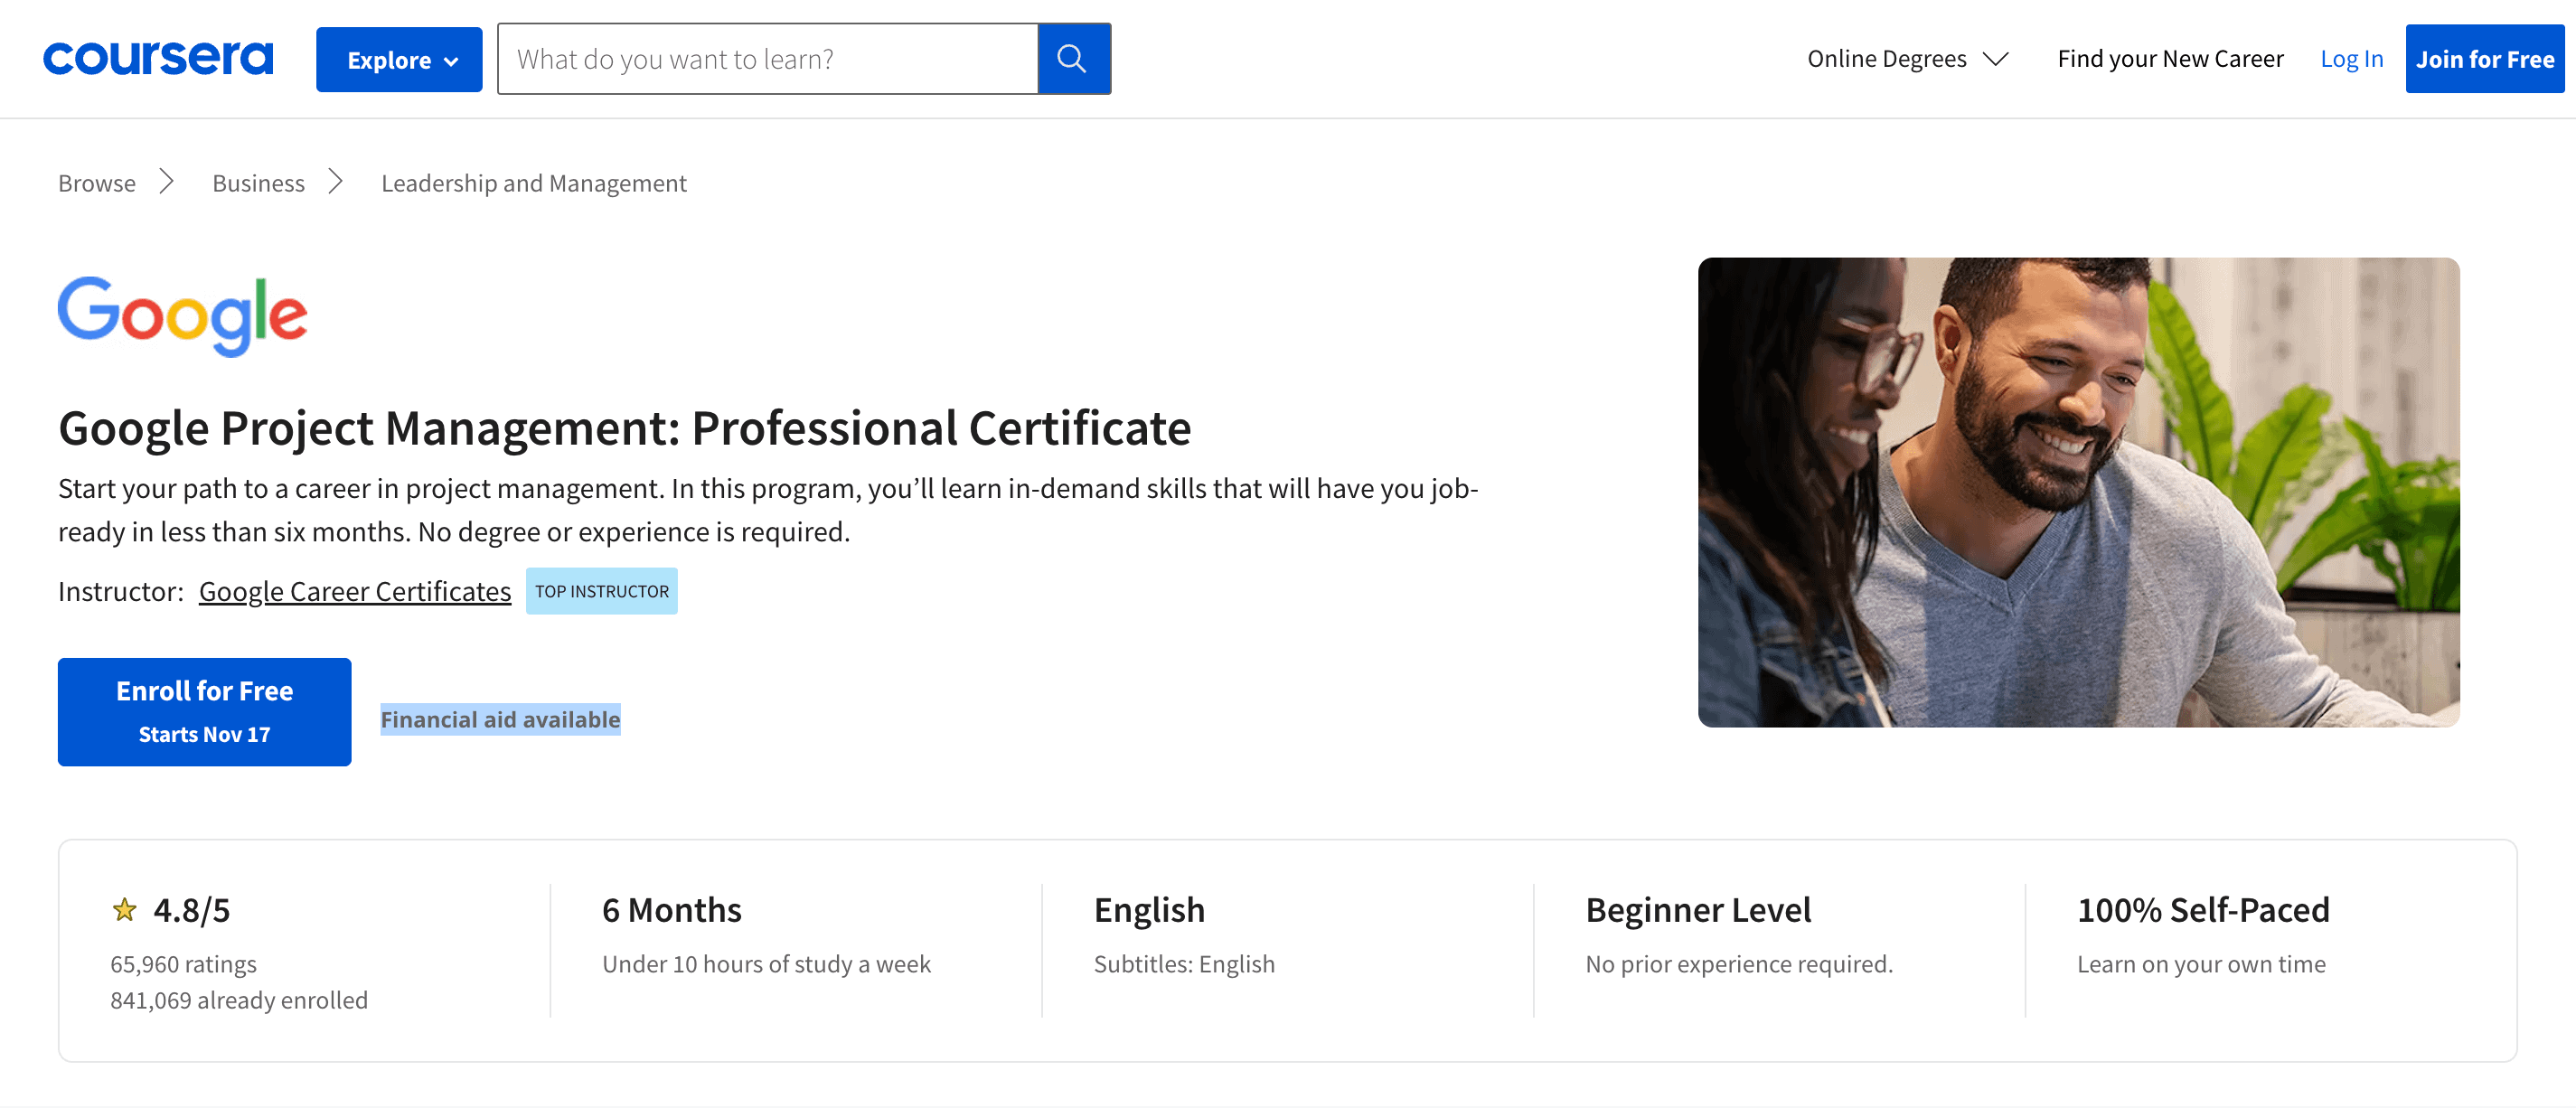 A screenshot of the Google Project Management: Professional Certificate course presented by Coursera